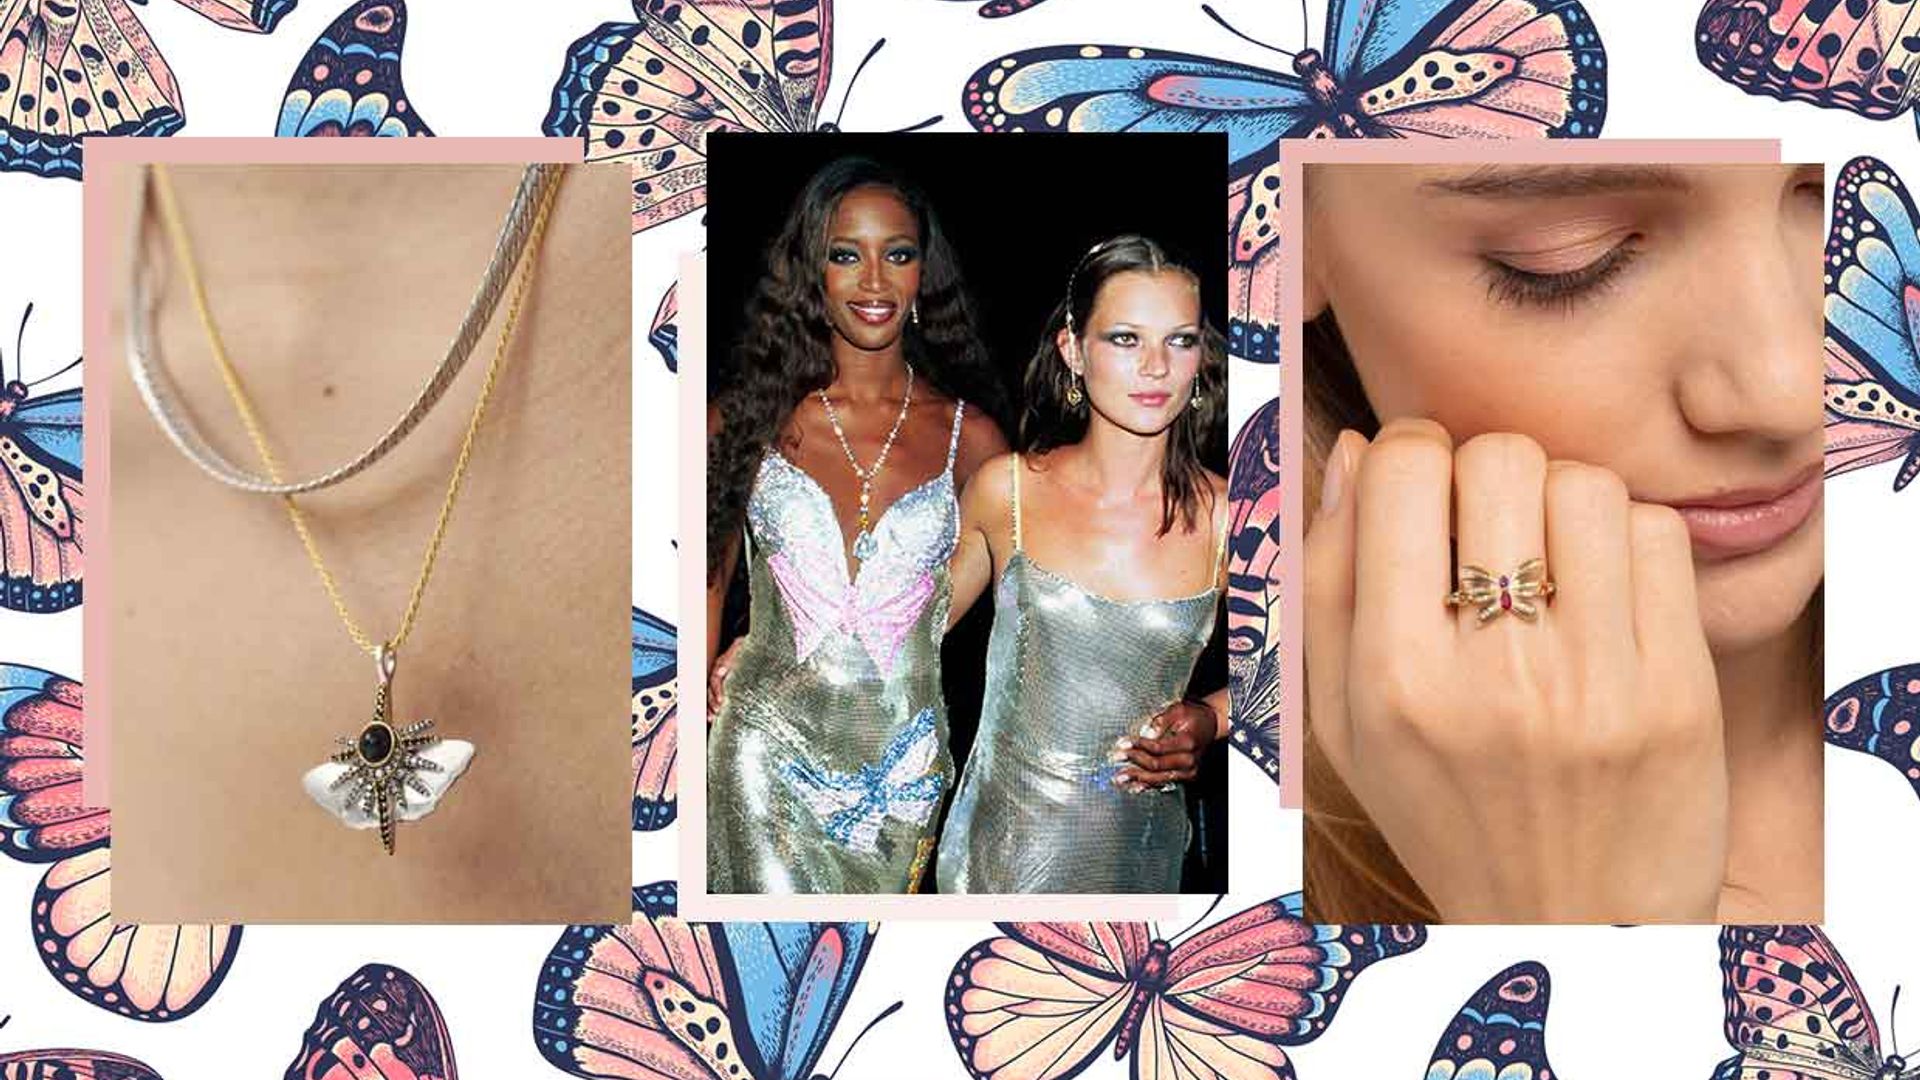 Butterfly jewellery is making a comeback - here's 14 butterfly pieces we're loving for late 90s nostalgia